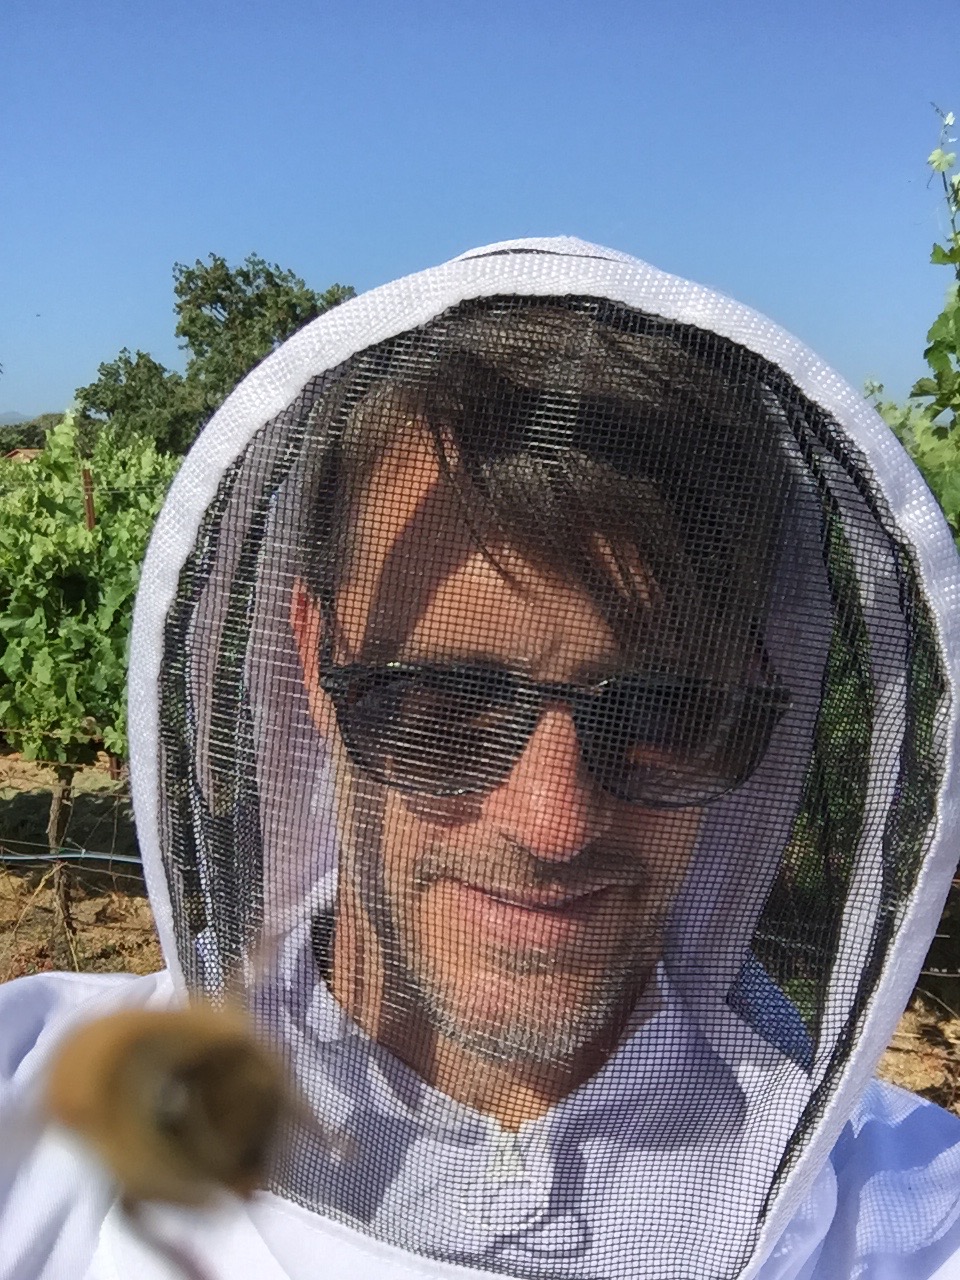  Brian working with his ladies of the hive.&nbsp; 